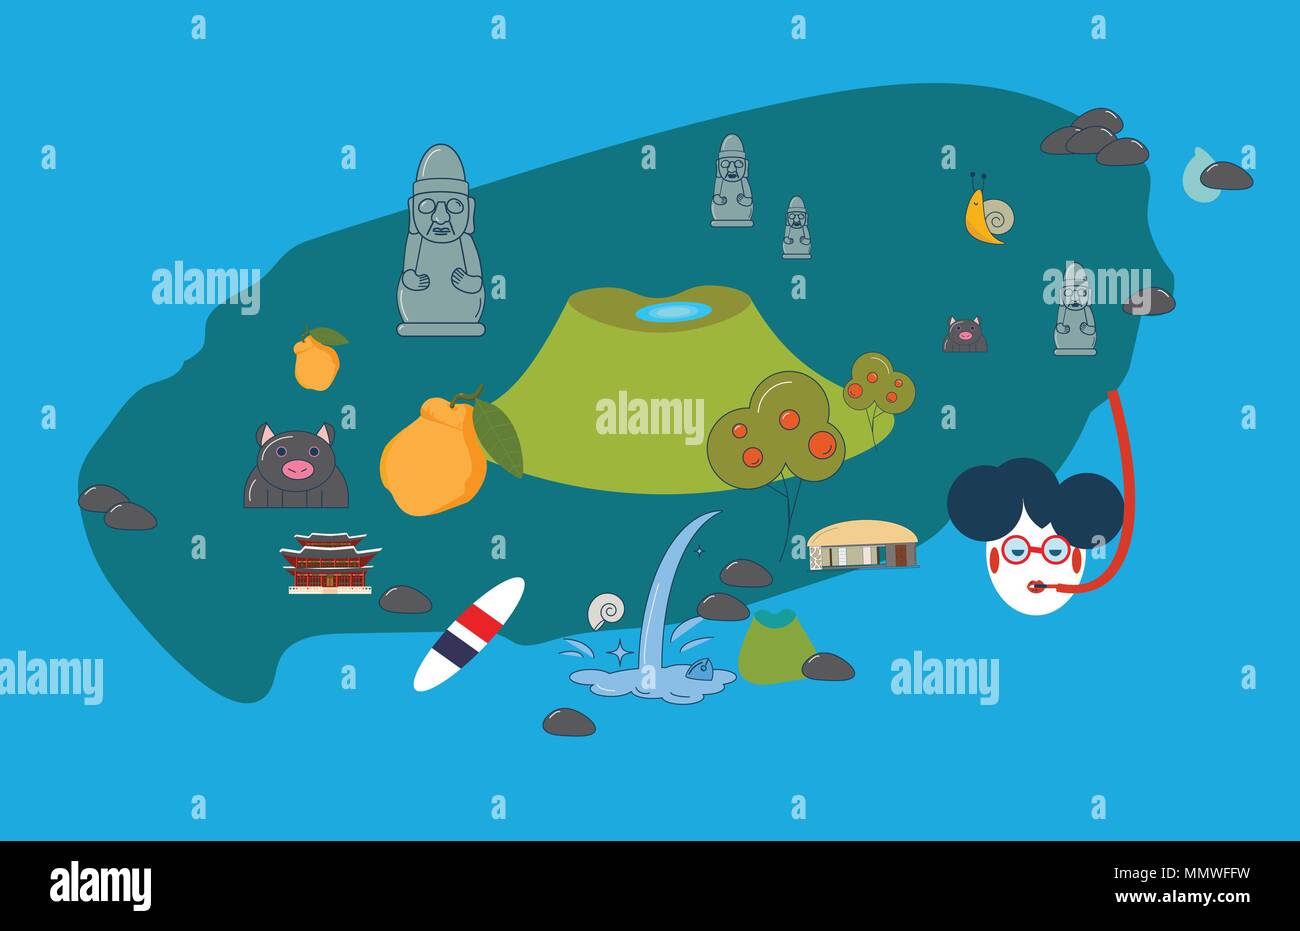 Vector illustration to promote Jeju Island: Jeju-do cartoon styled map with  attractions and symbols: Hallasan, Dol Hareubang or harubang, known as  Stone grandfather, Haenyeo or Jeju female diver, etc Stock Vector Image